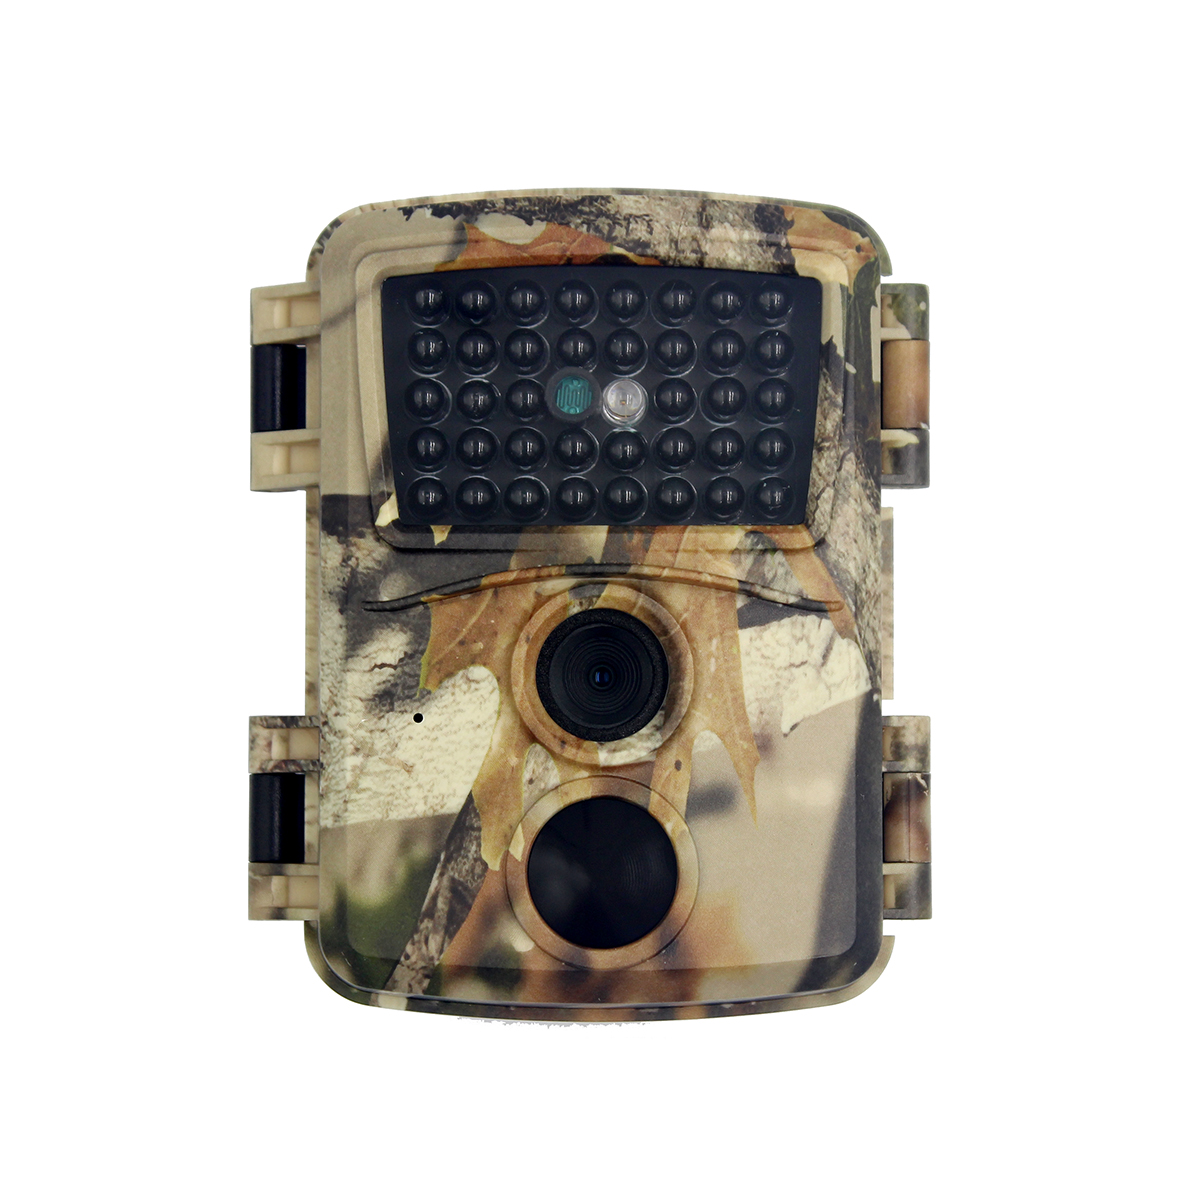 Find PR600C 12MP 1080P Night Vision Waterproof Hunting Camera 0.8s Trigger Time Recorder Wildlife Trail Camera for Home Security and Wildlife Monitoring for Sale on Gipsybee.com with cryptocurrencies